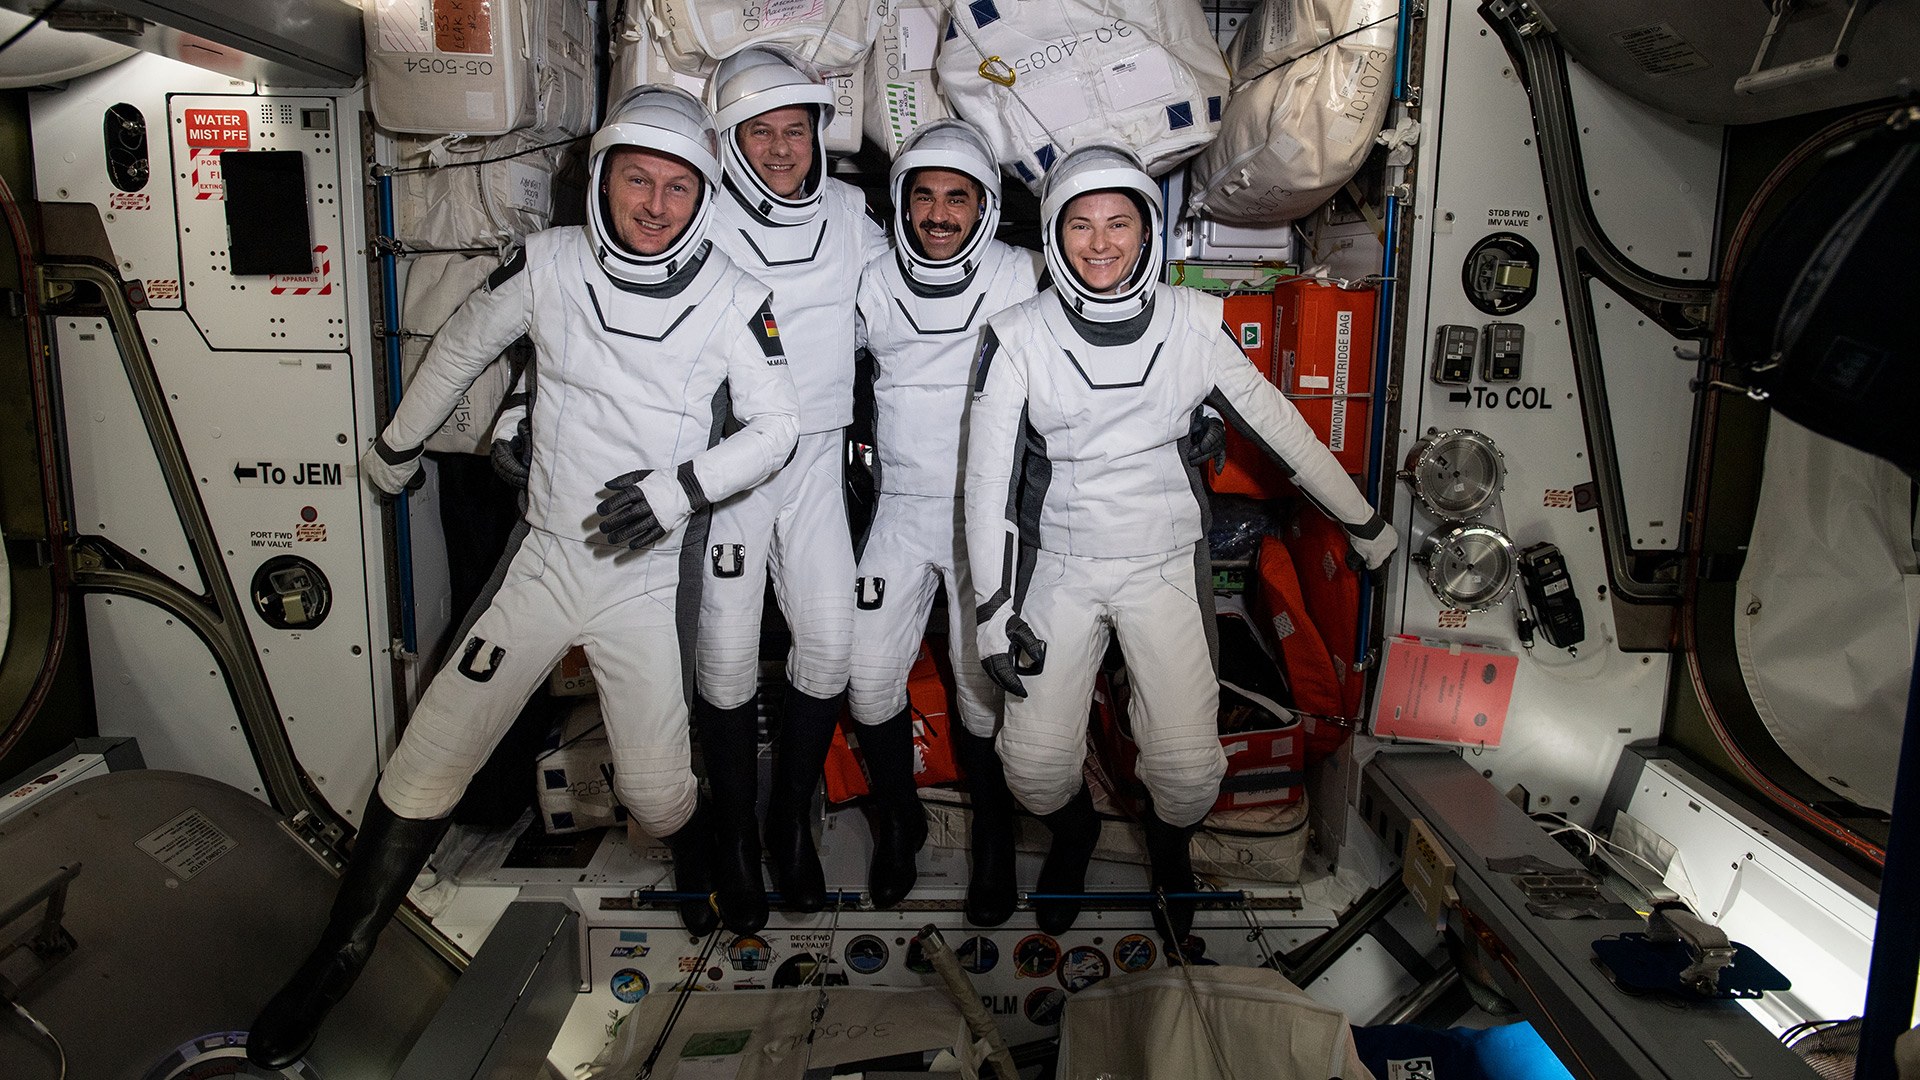 ESA astronaut Matthias Maurer and his Crew 3 colleagues in their spacesuits